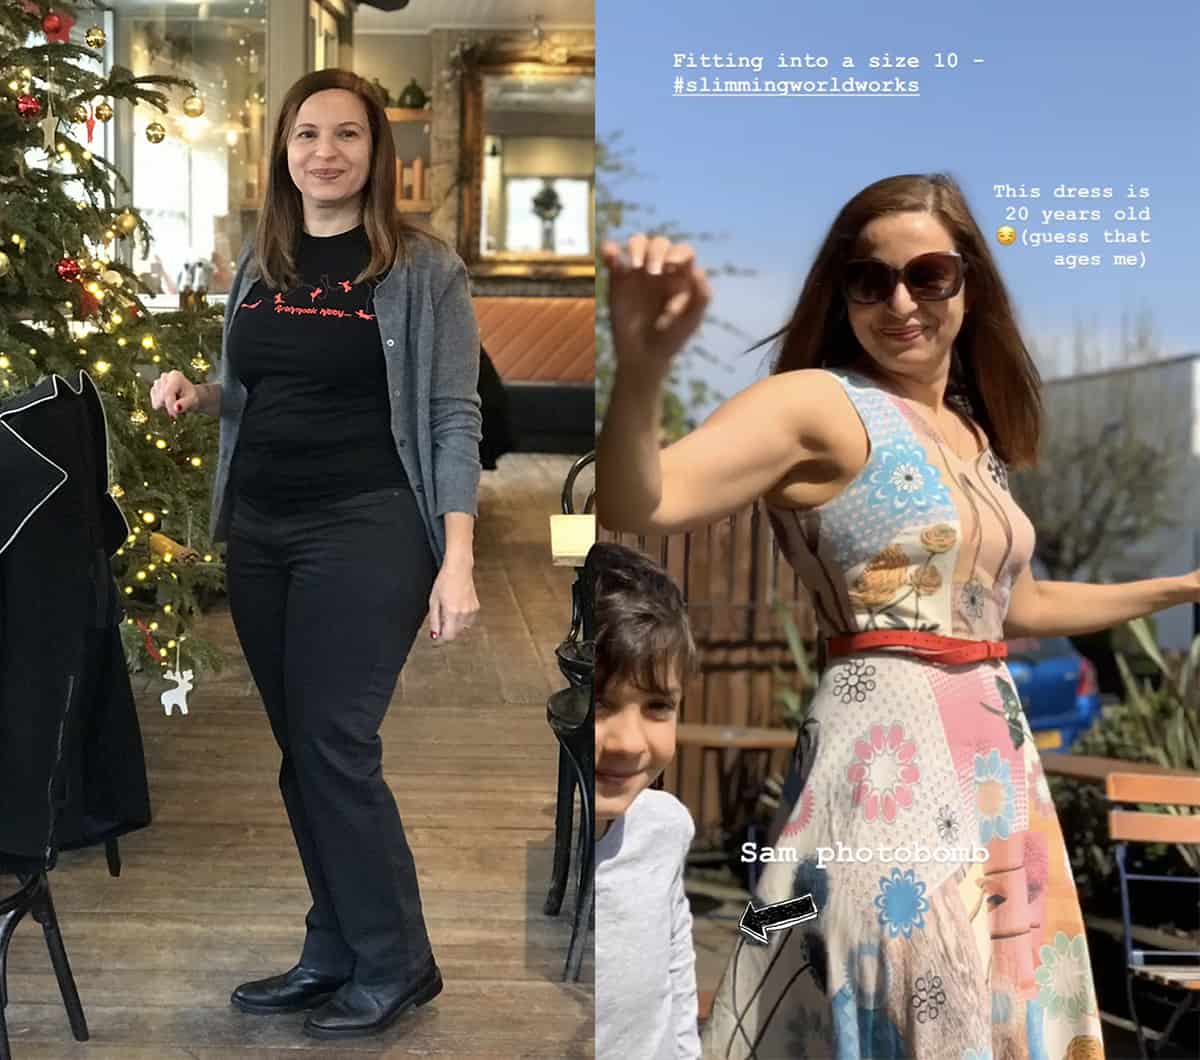 Me before and after 6 months on Slimming World plan